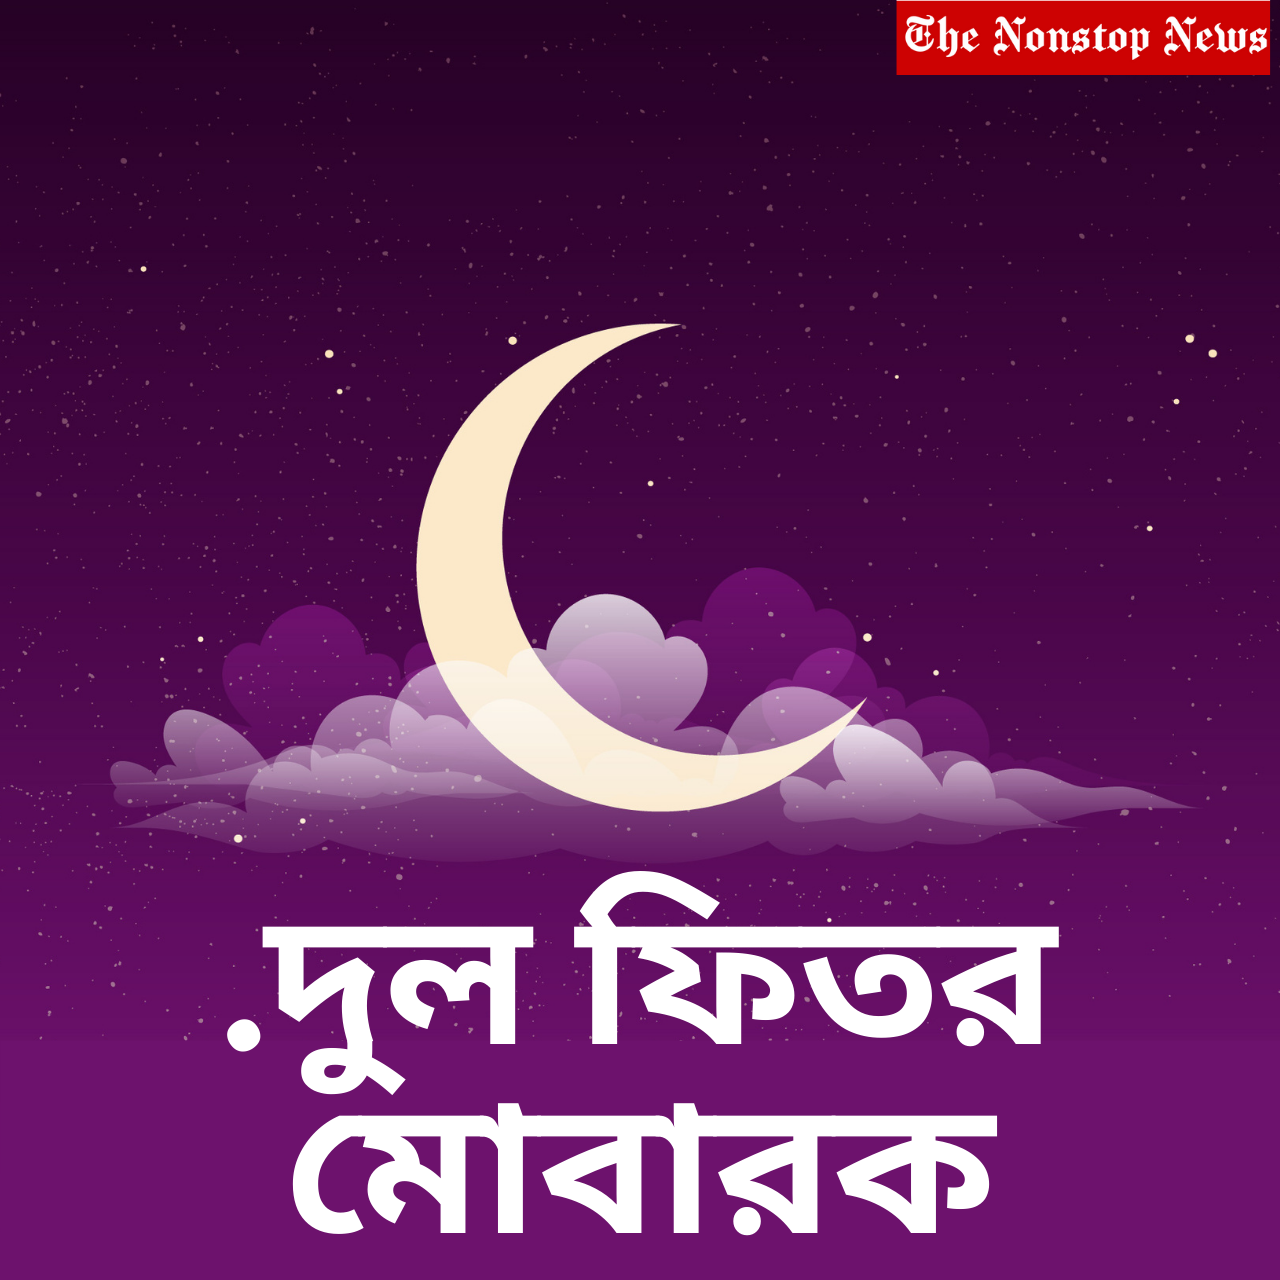 Eid-ul-Fitr Mubarak 2021 Wishes in Tamil and Bengali, Images, Greetings, Messages, and Quotes to share on this Eid al-Fitr